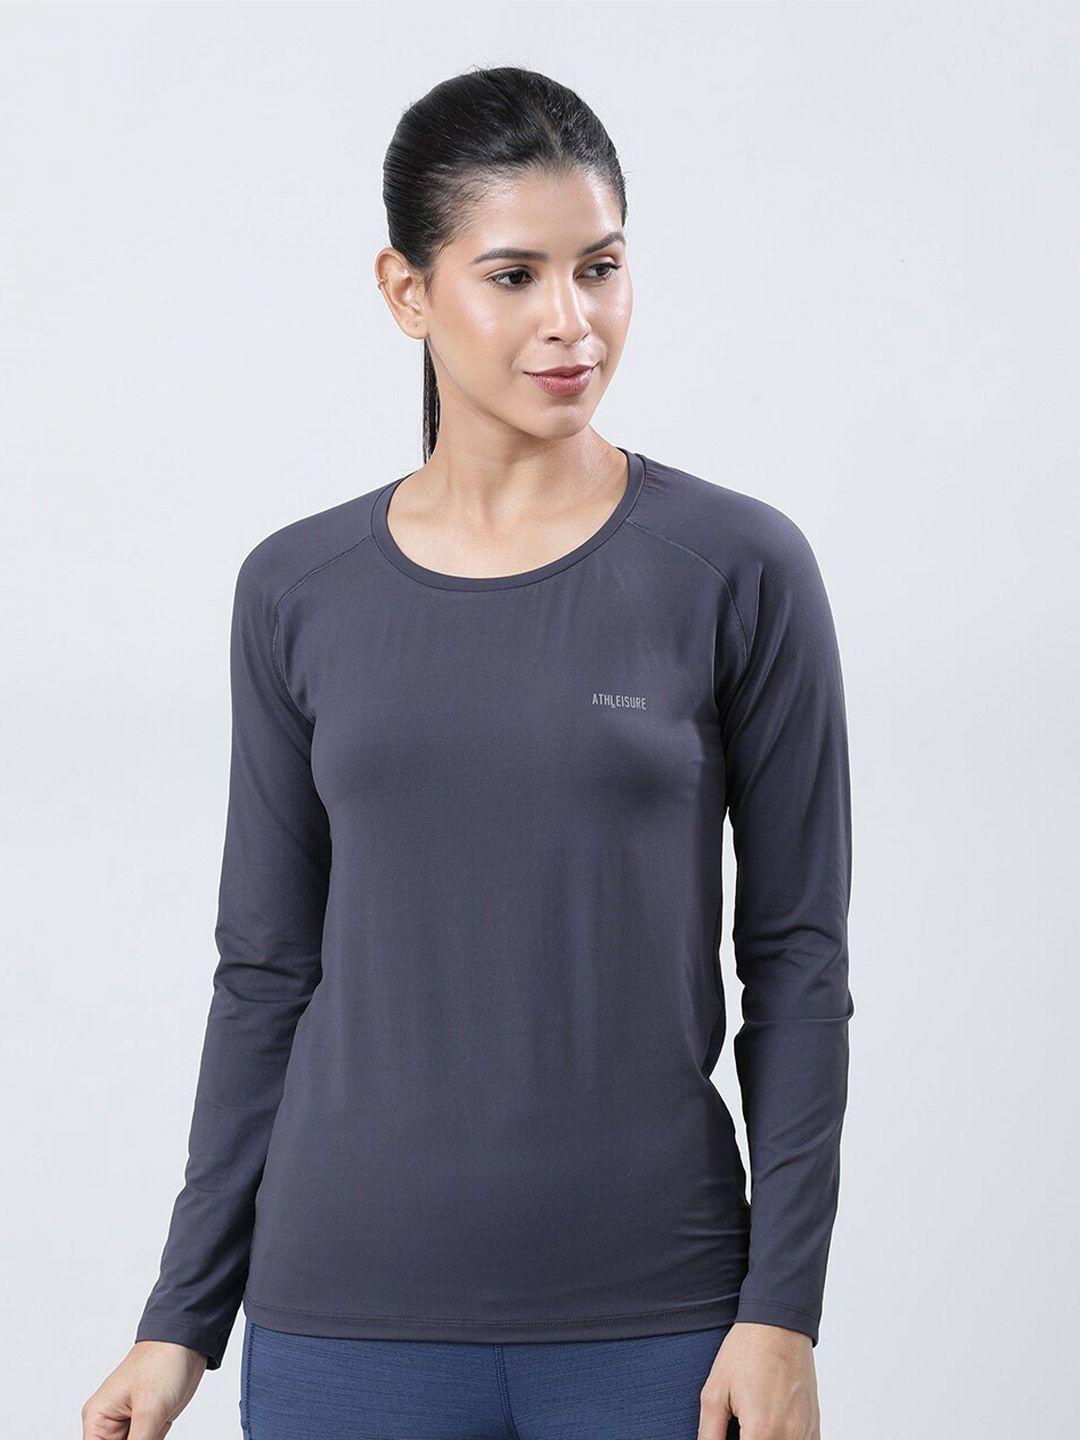 lovable sport round neck long sleeves top